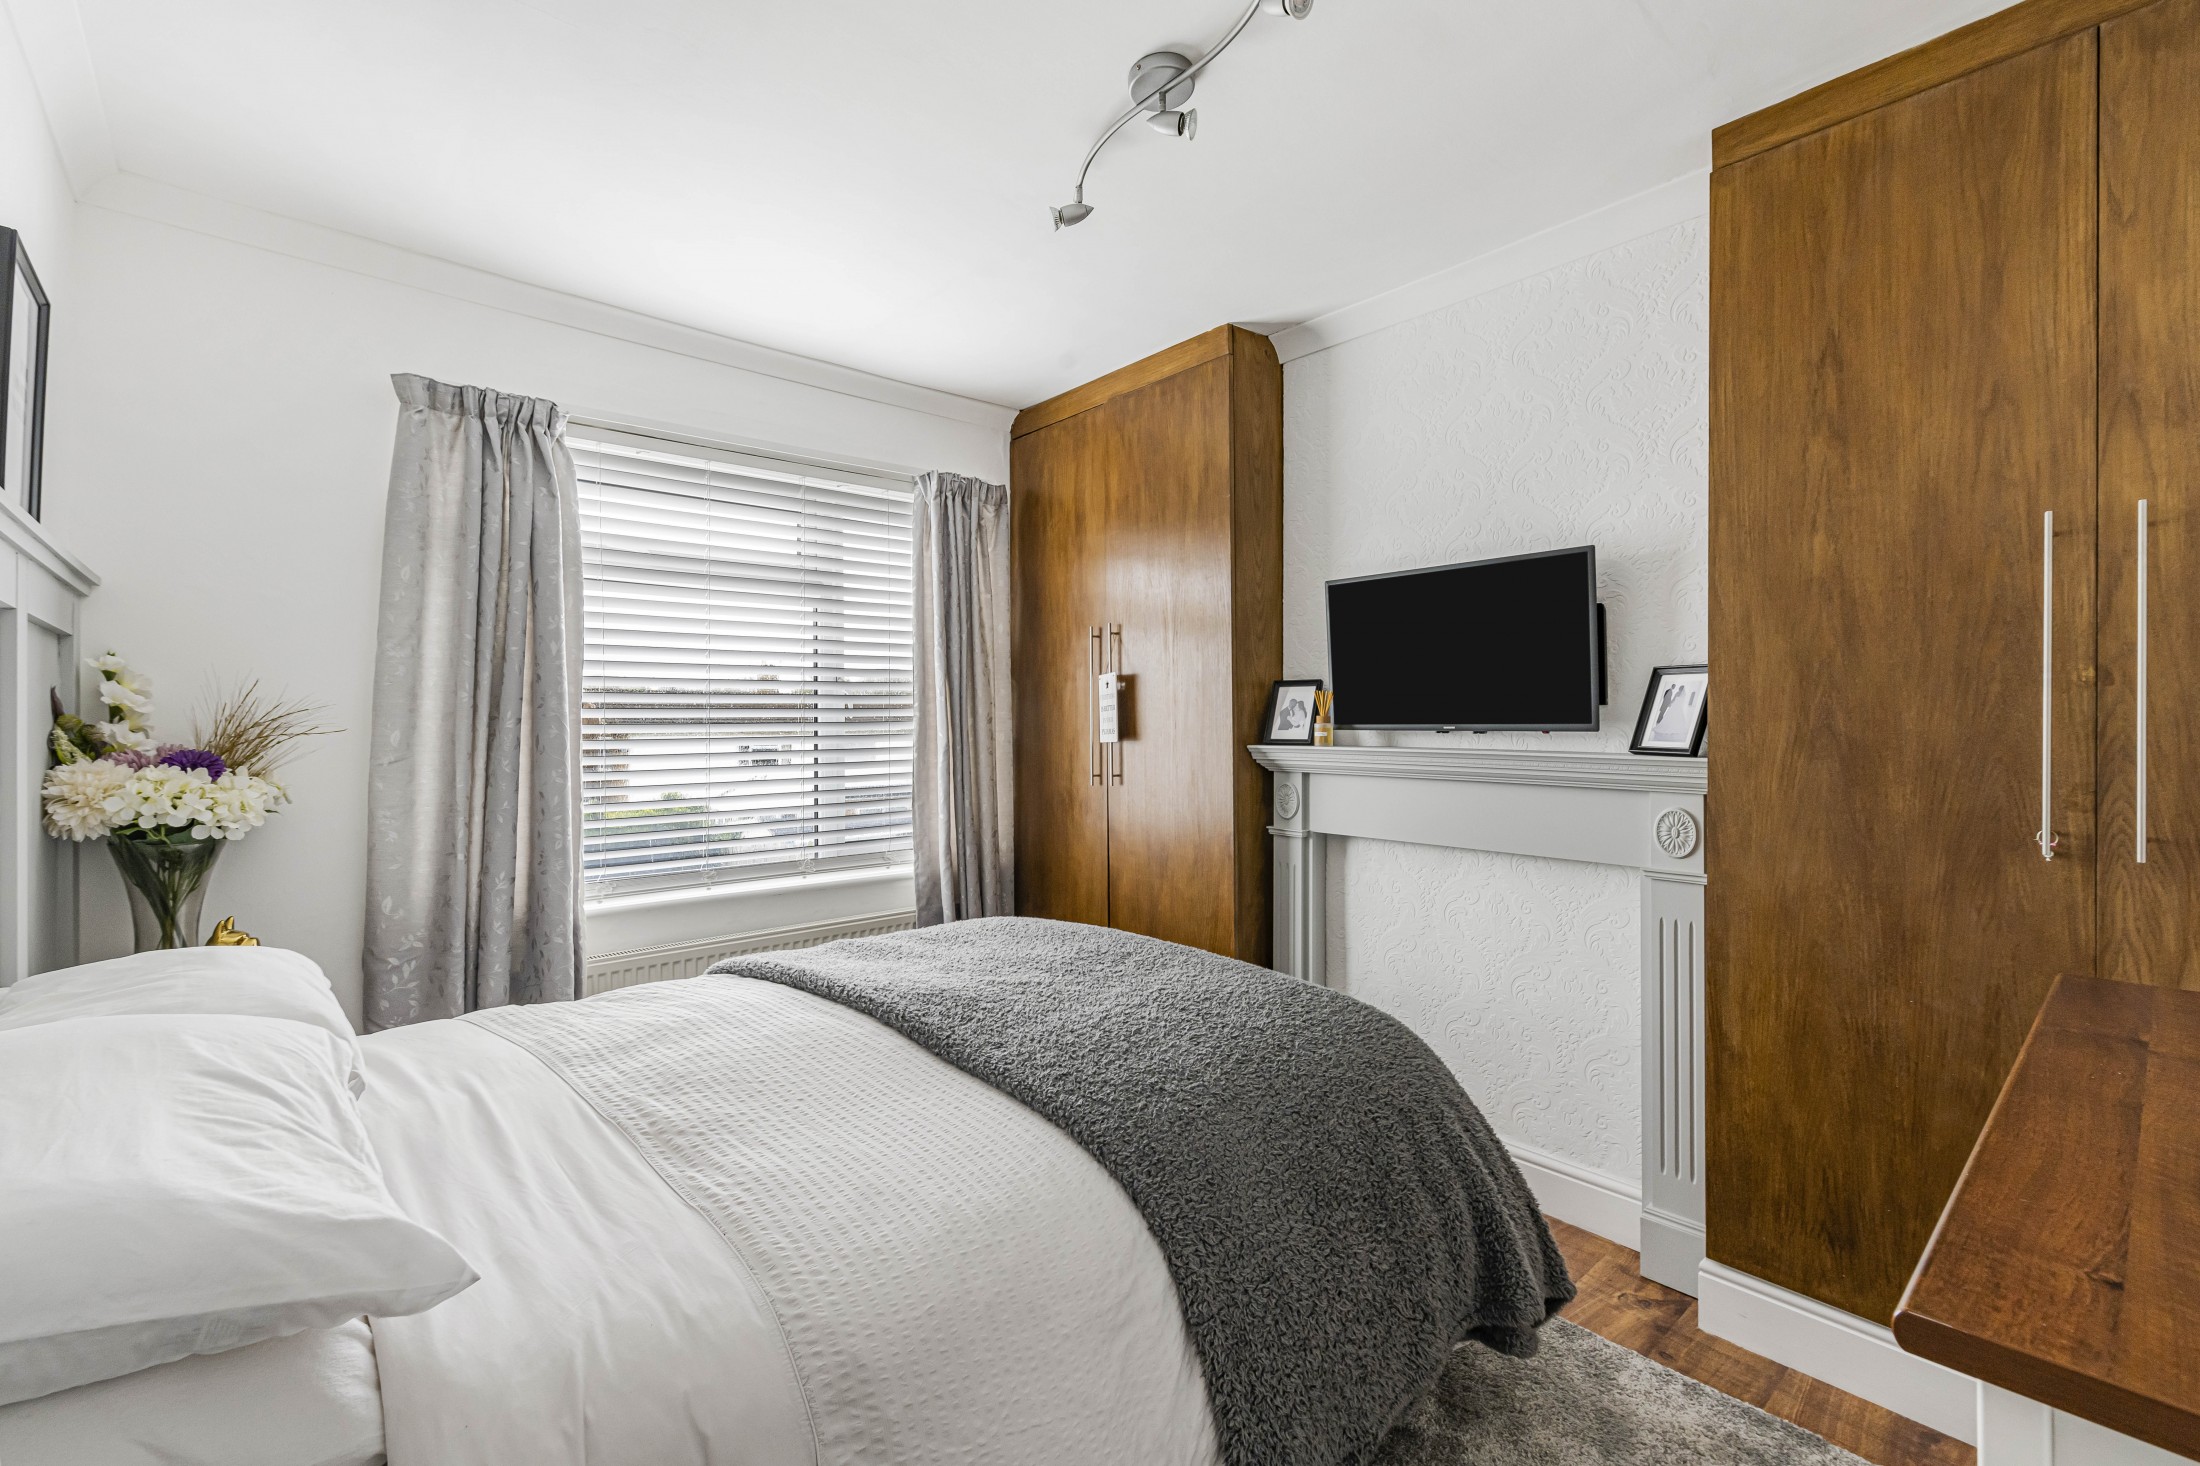 Images for Chelsfield Lane, Orpington, BR5